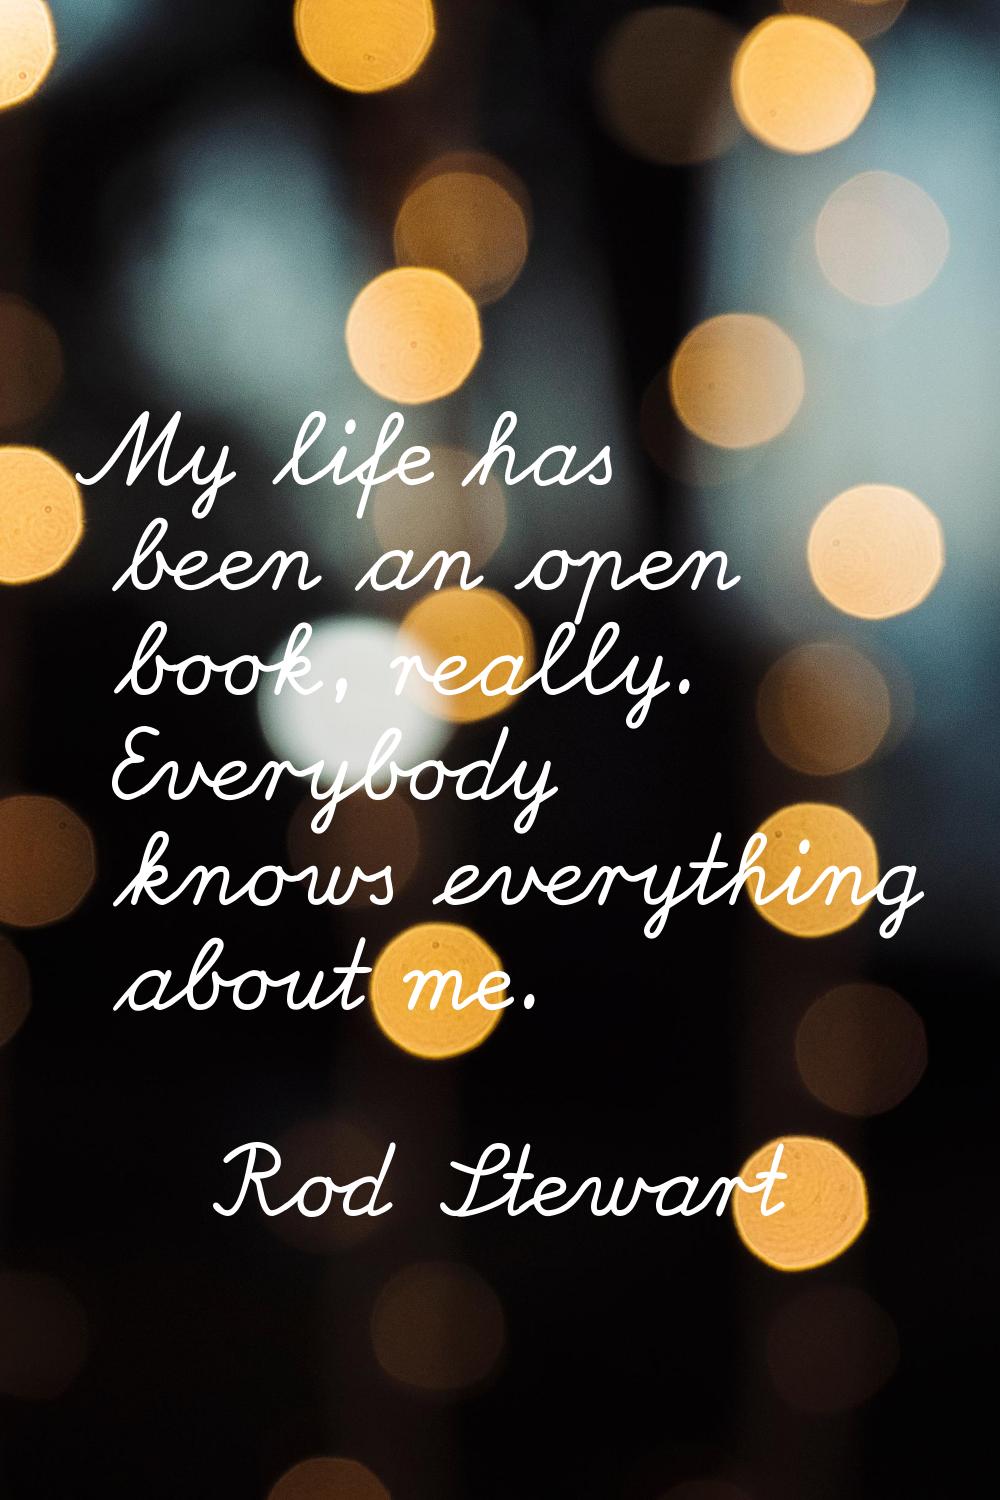 My life has been an open book, really. Everybody knows everything about me.